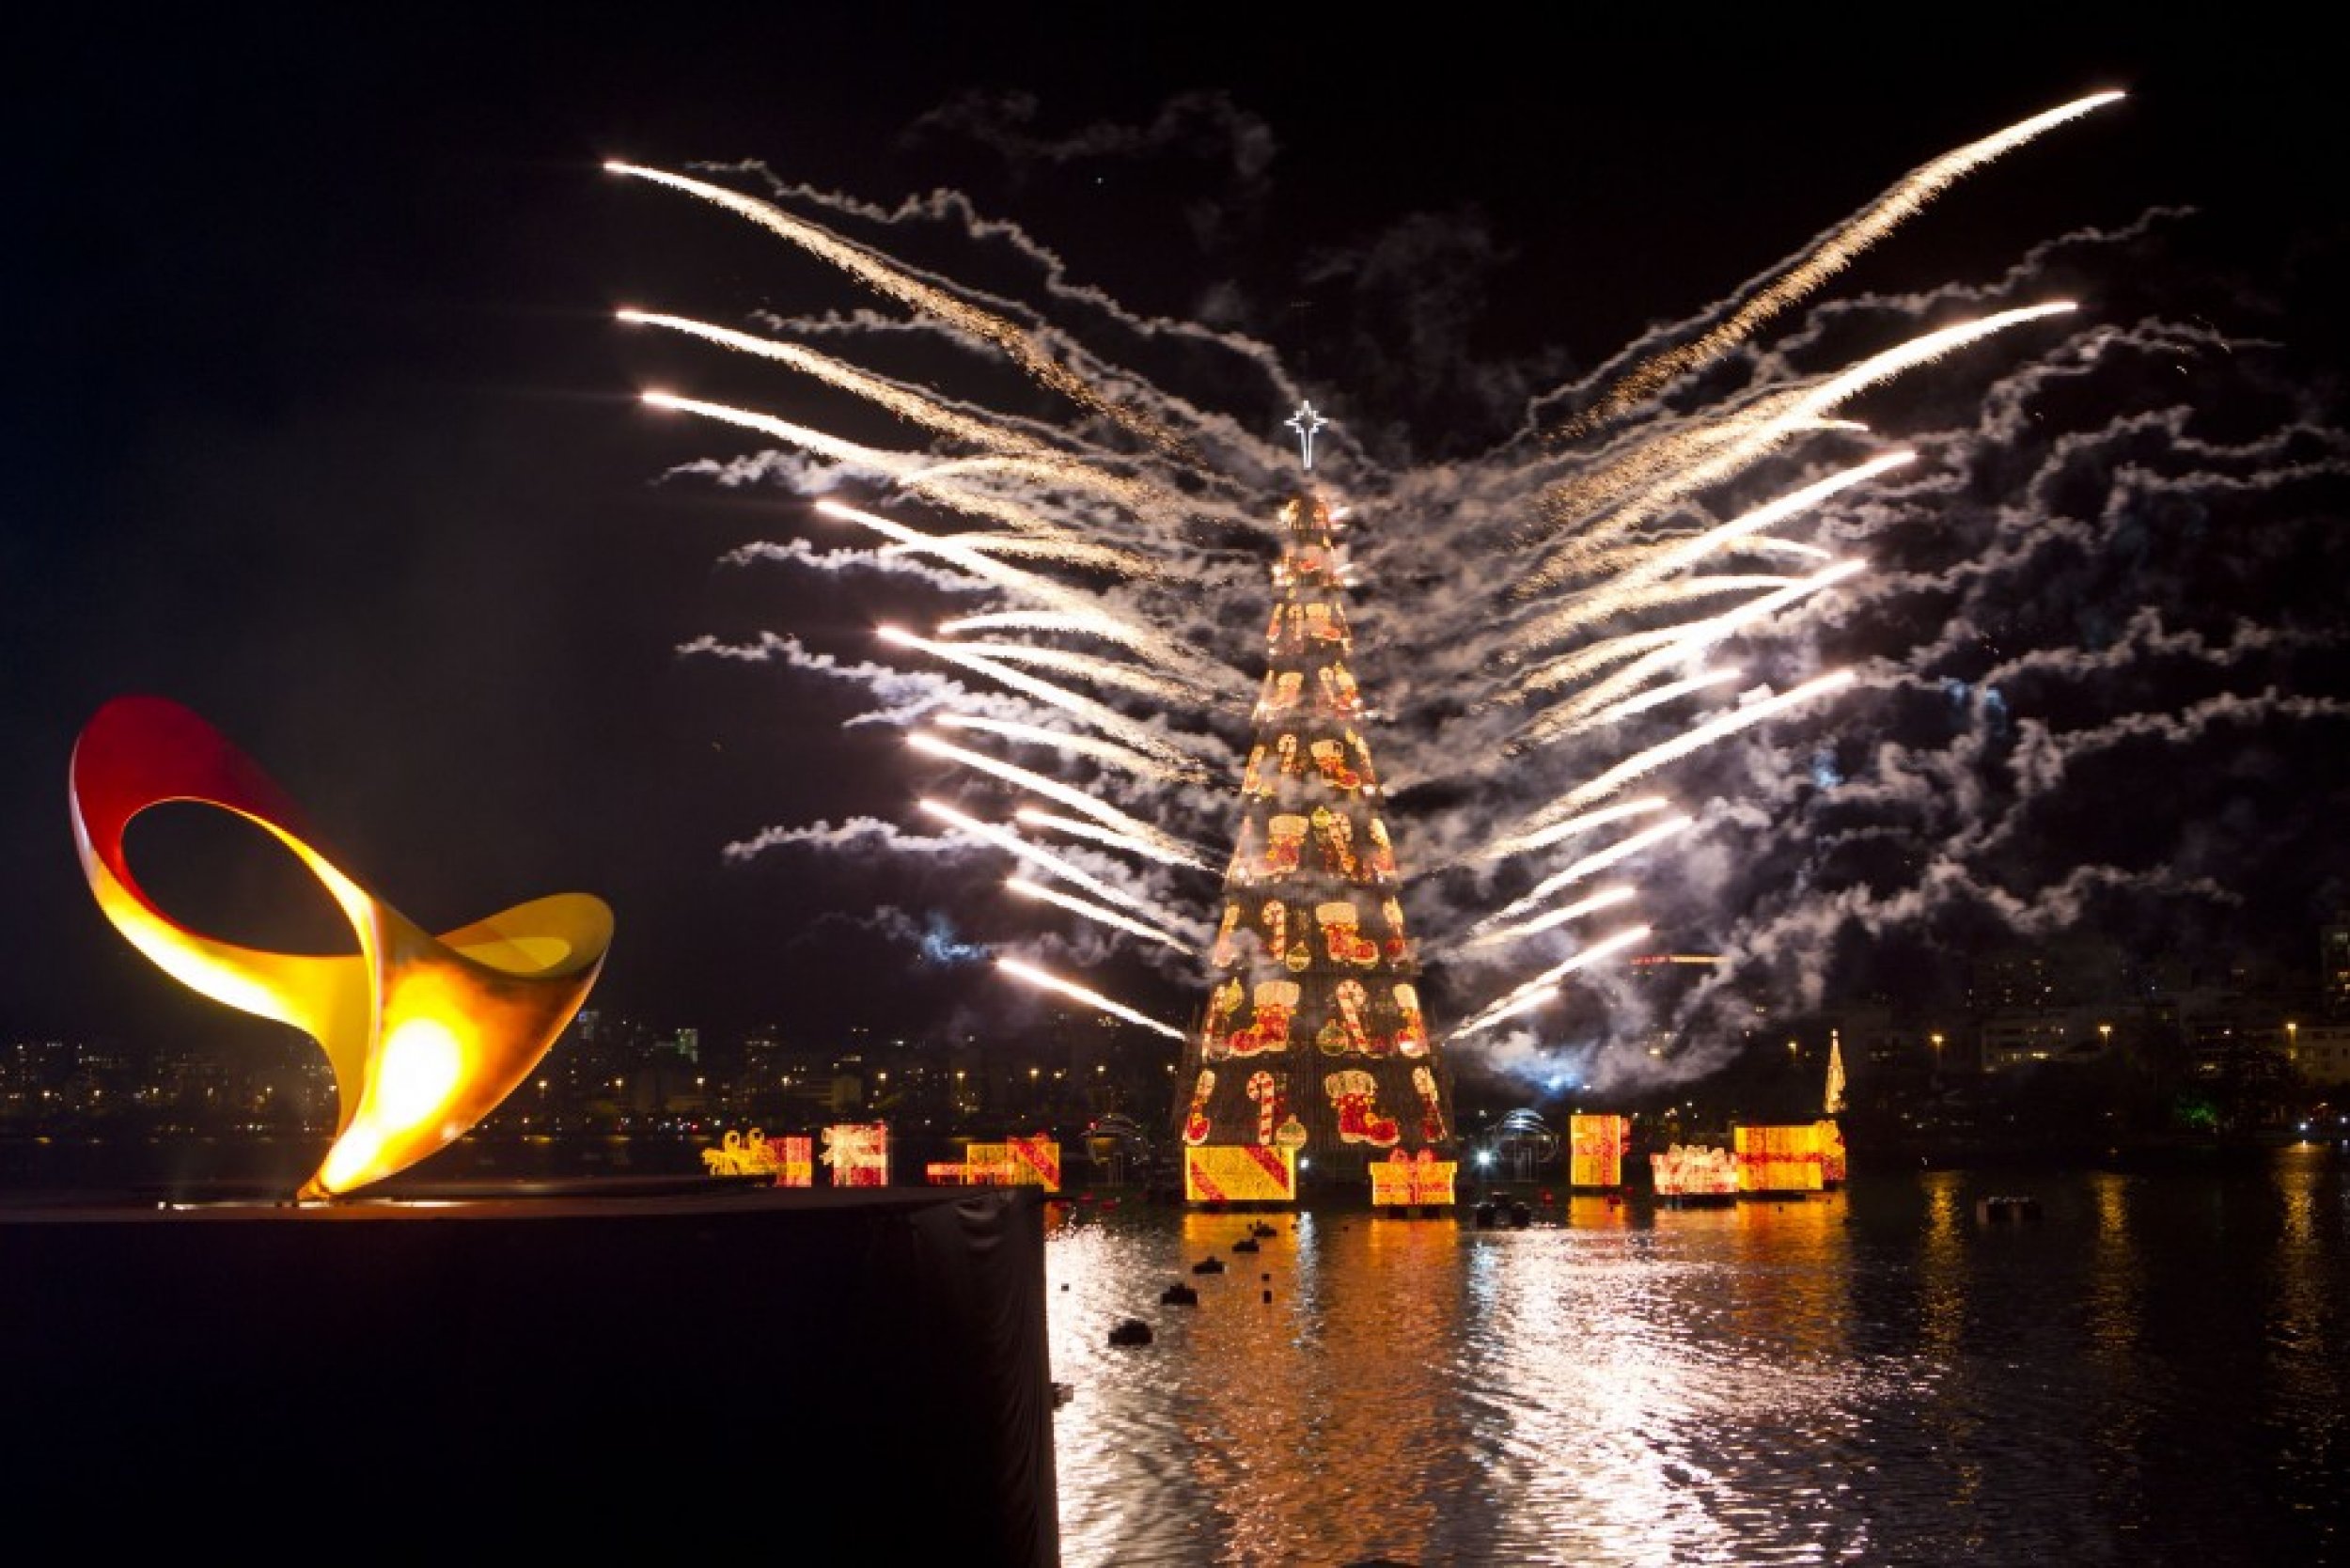 Worlds Largest Floating Christmas Tree Unveiled in Brazil